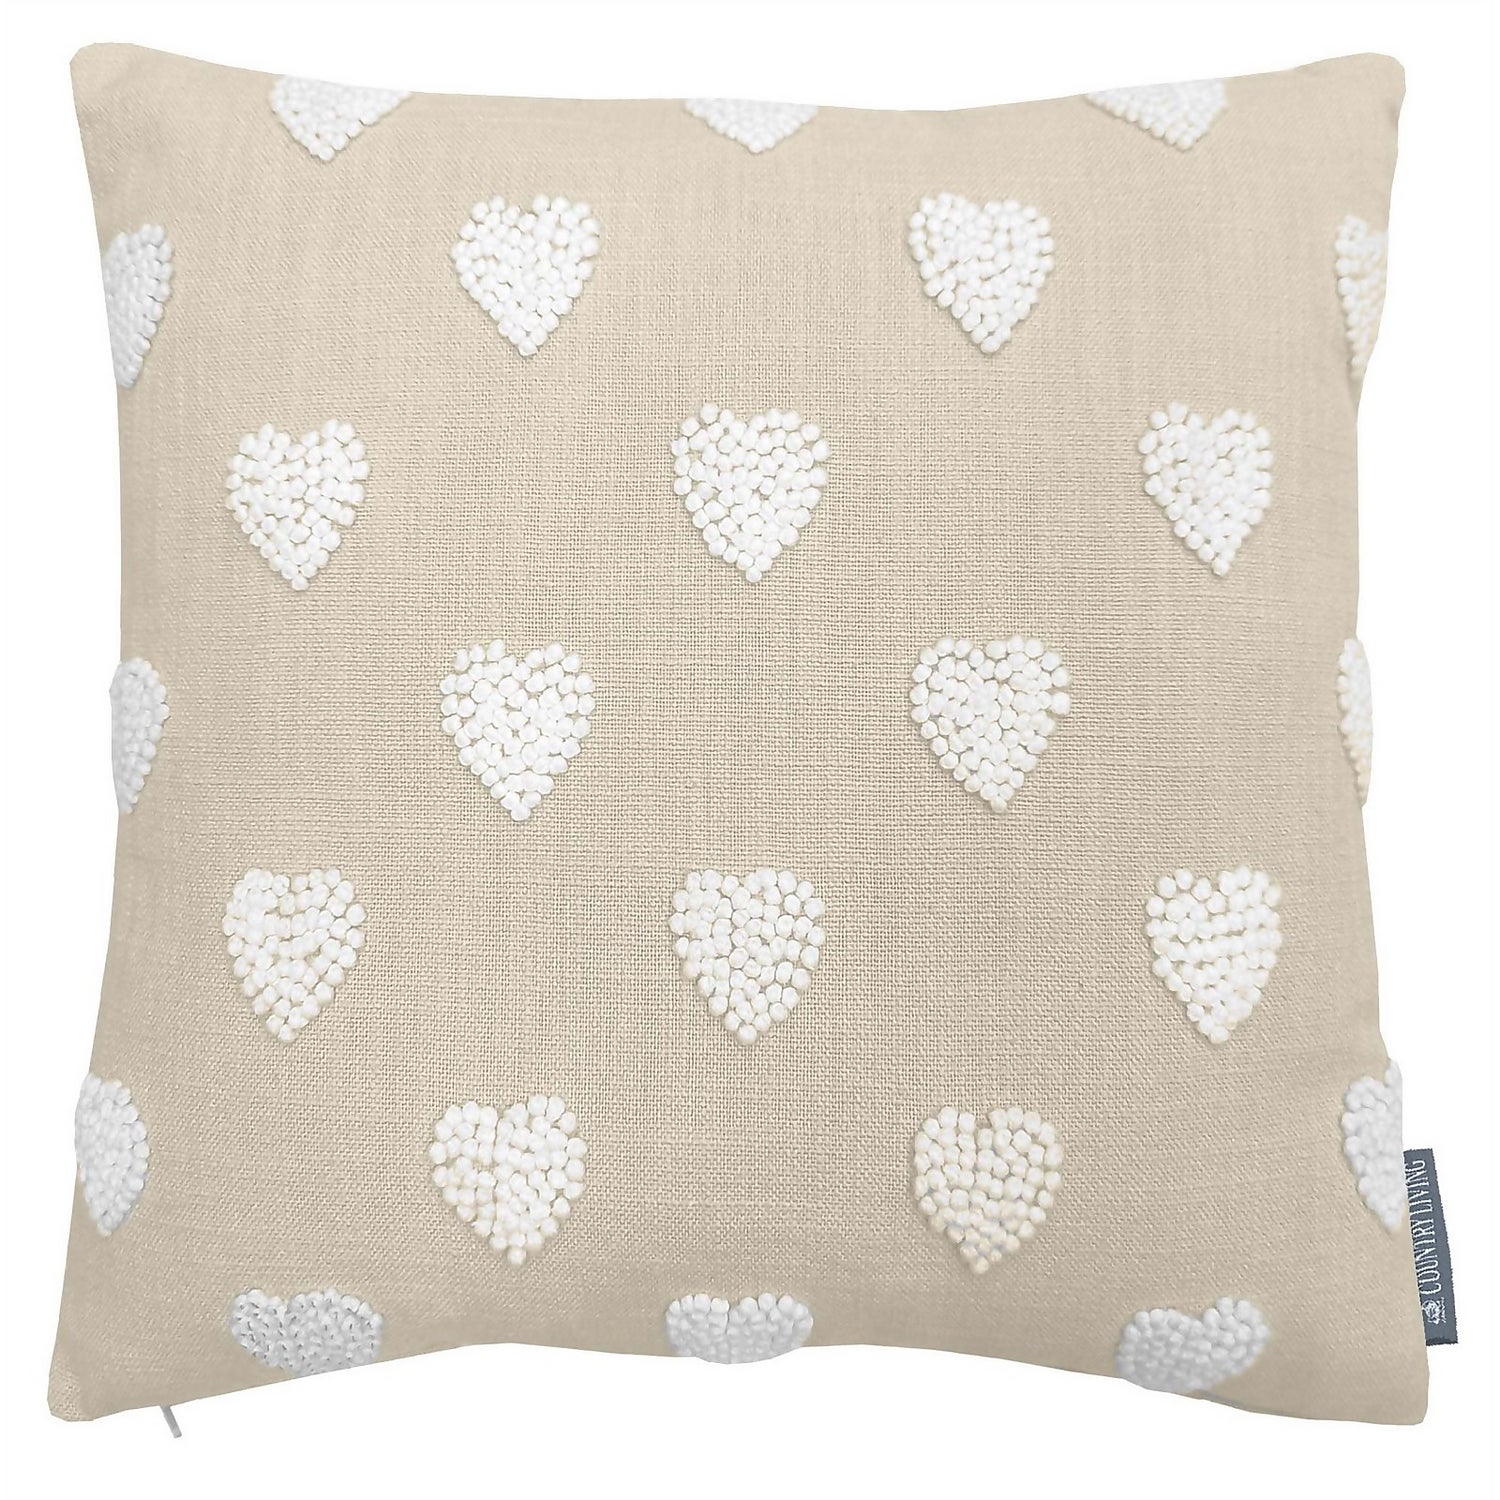 Country Living French Knot Heart Cushion - 40x40cm - Ivory